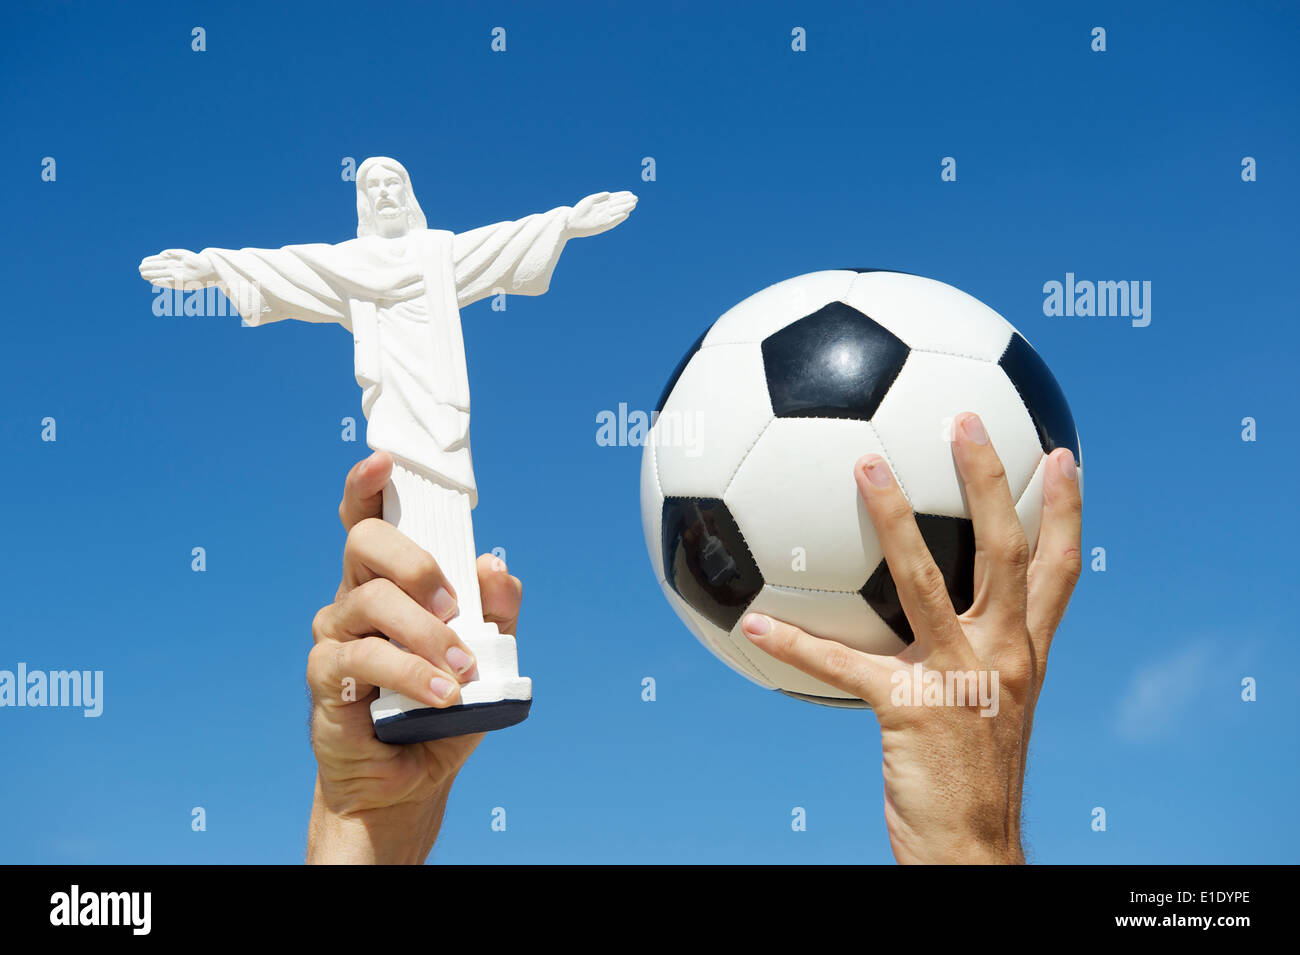 Brazilian hands holding football soccer ball and souvenir statue of Corcovado Cristo Redentor in the air bright blue sky Stock Photo